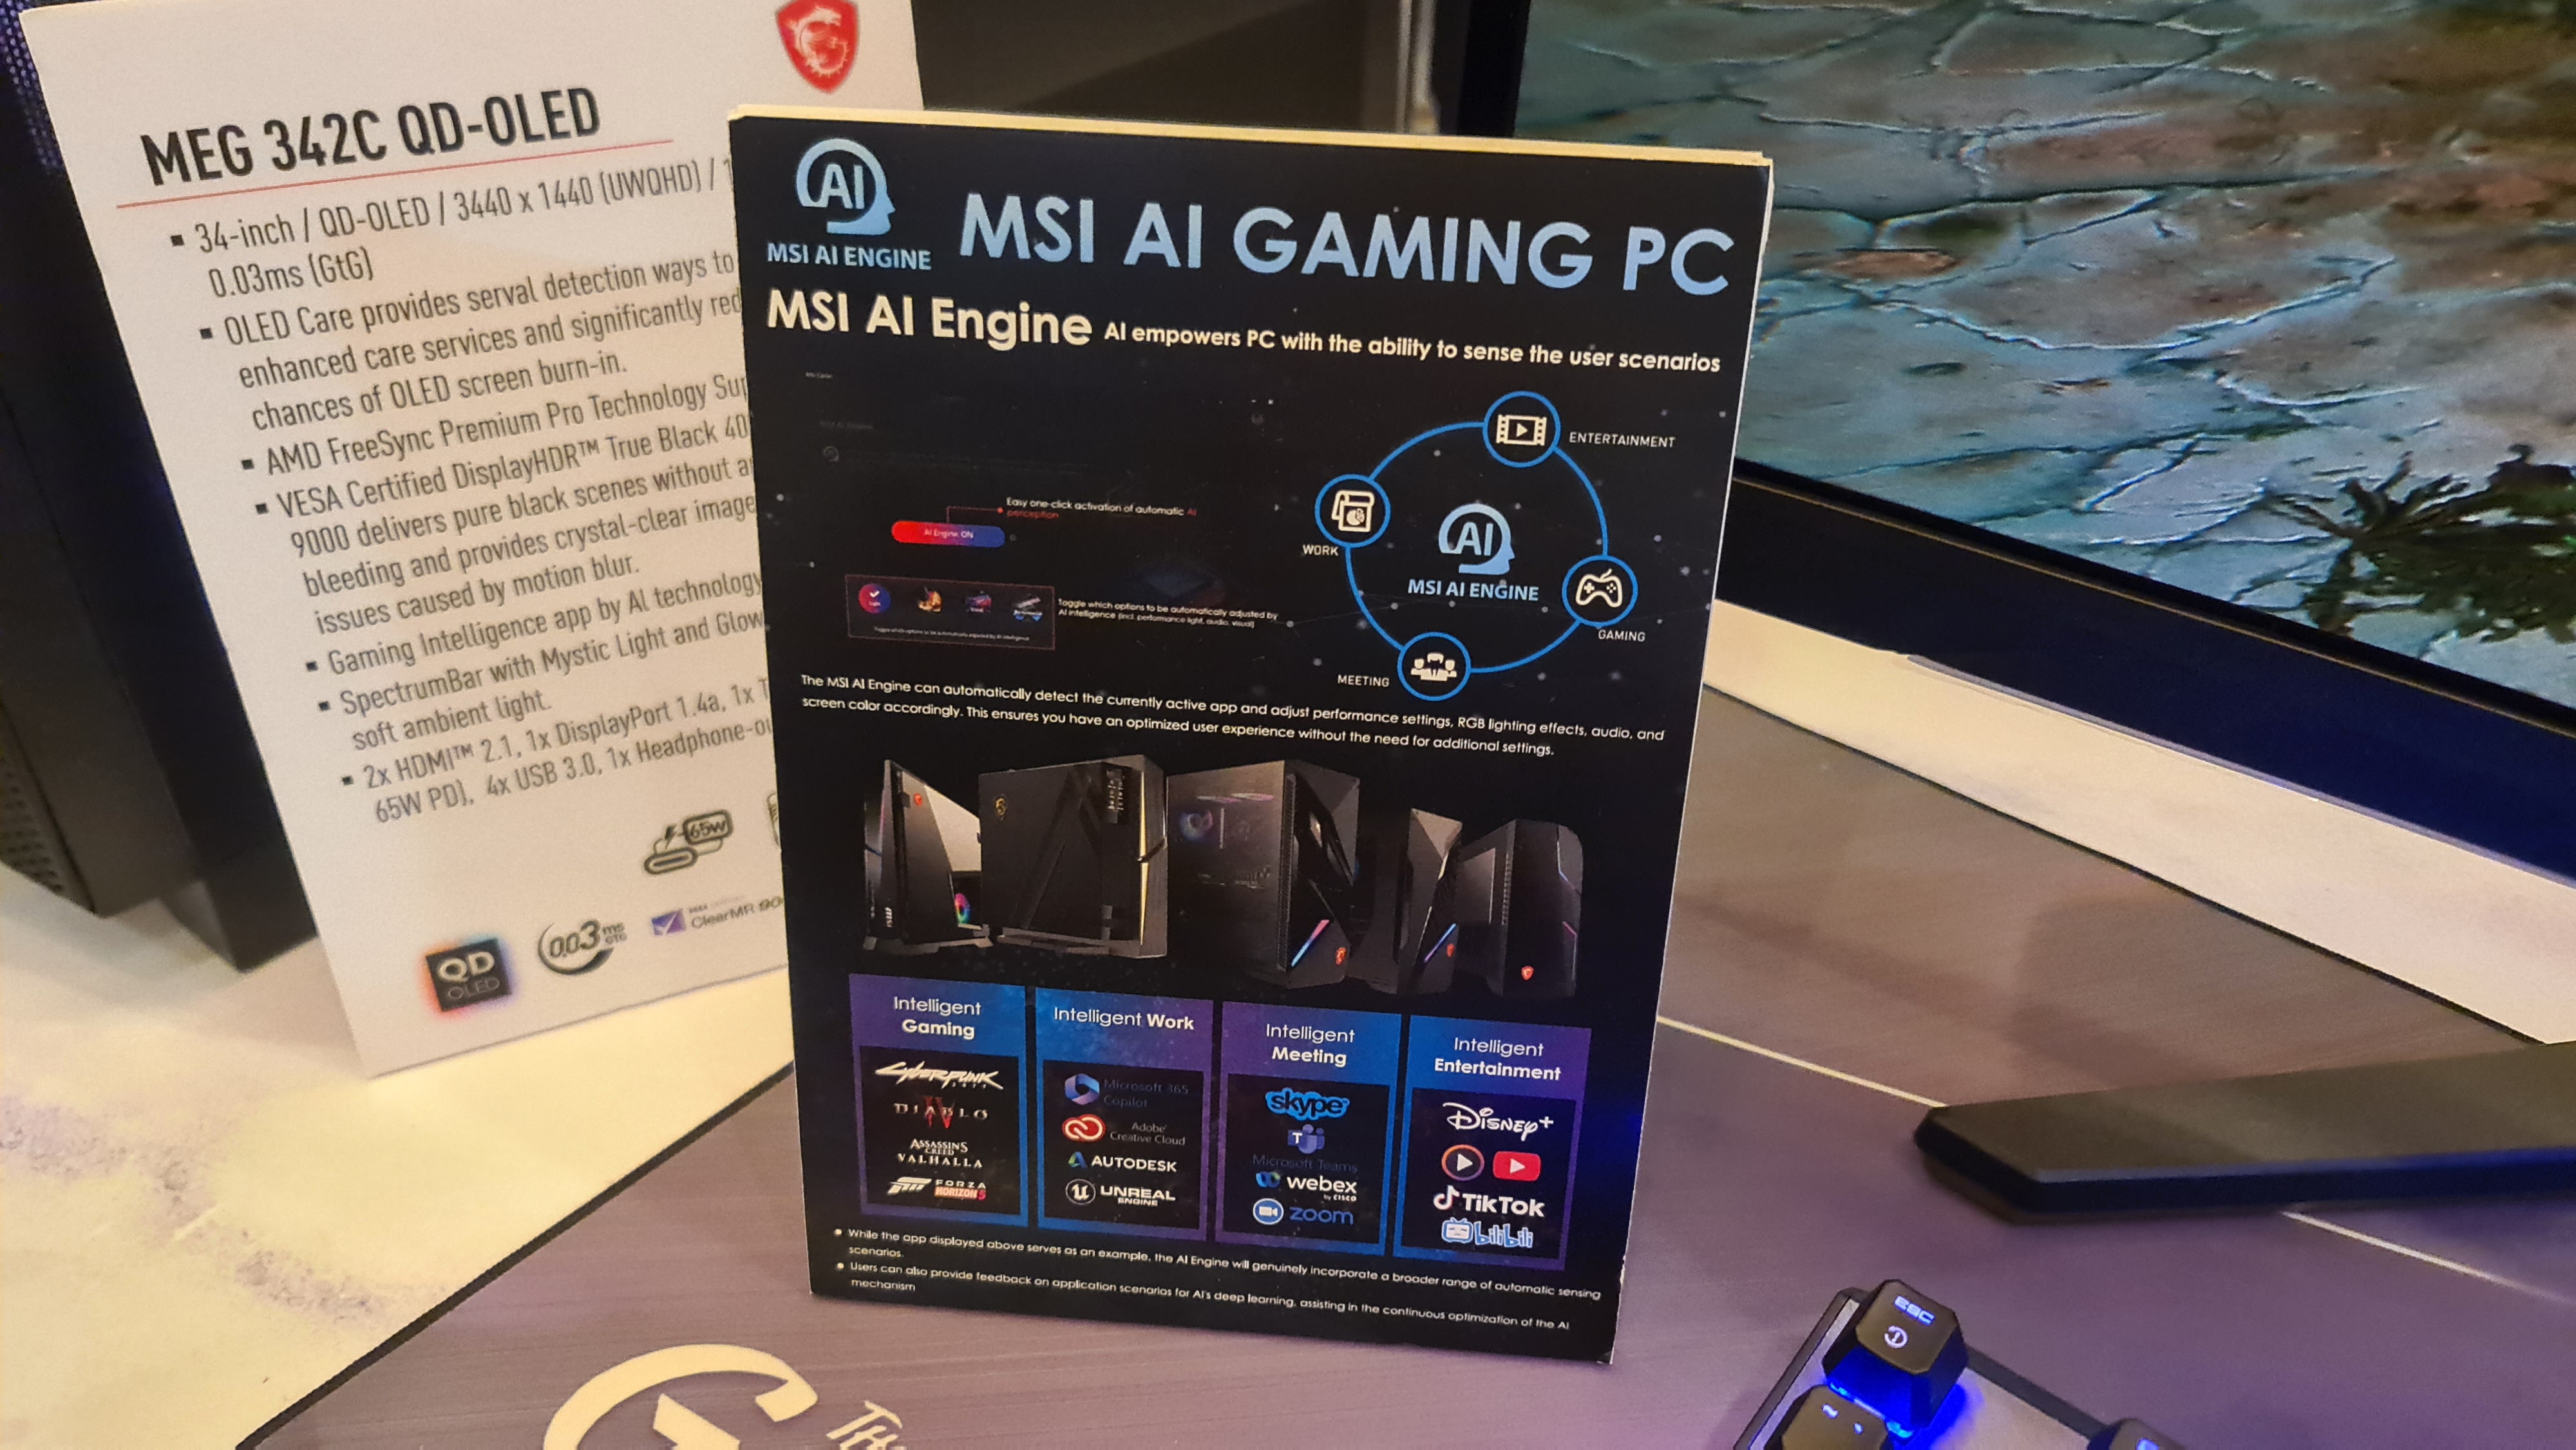 A board explaining the specs for an MSI AI gaming PC.